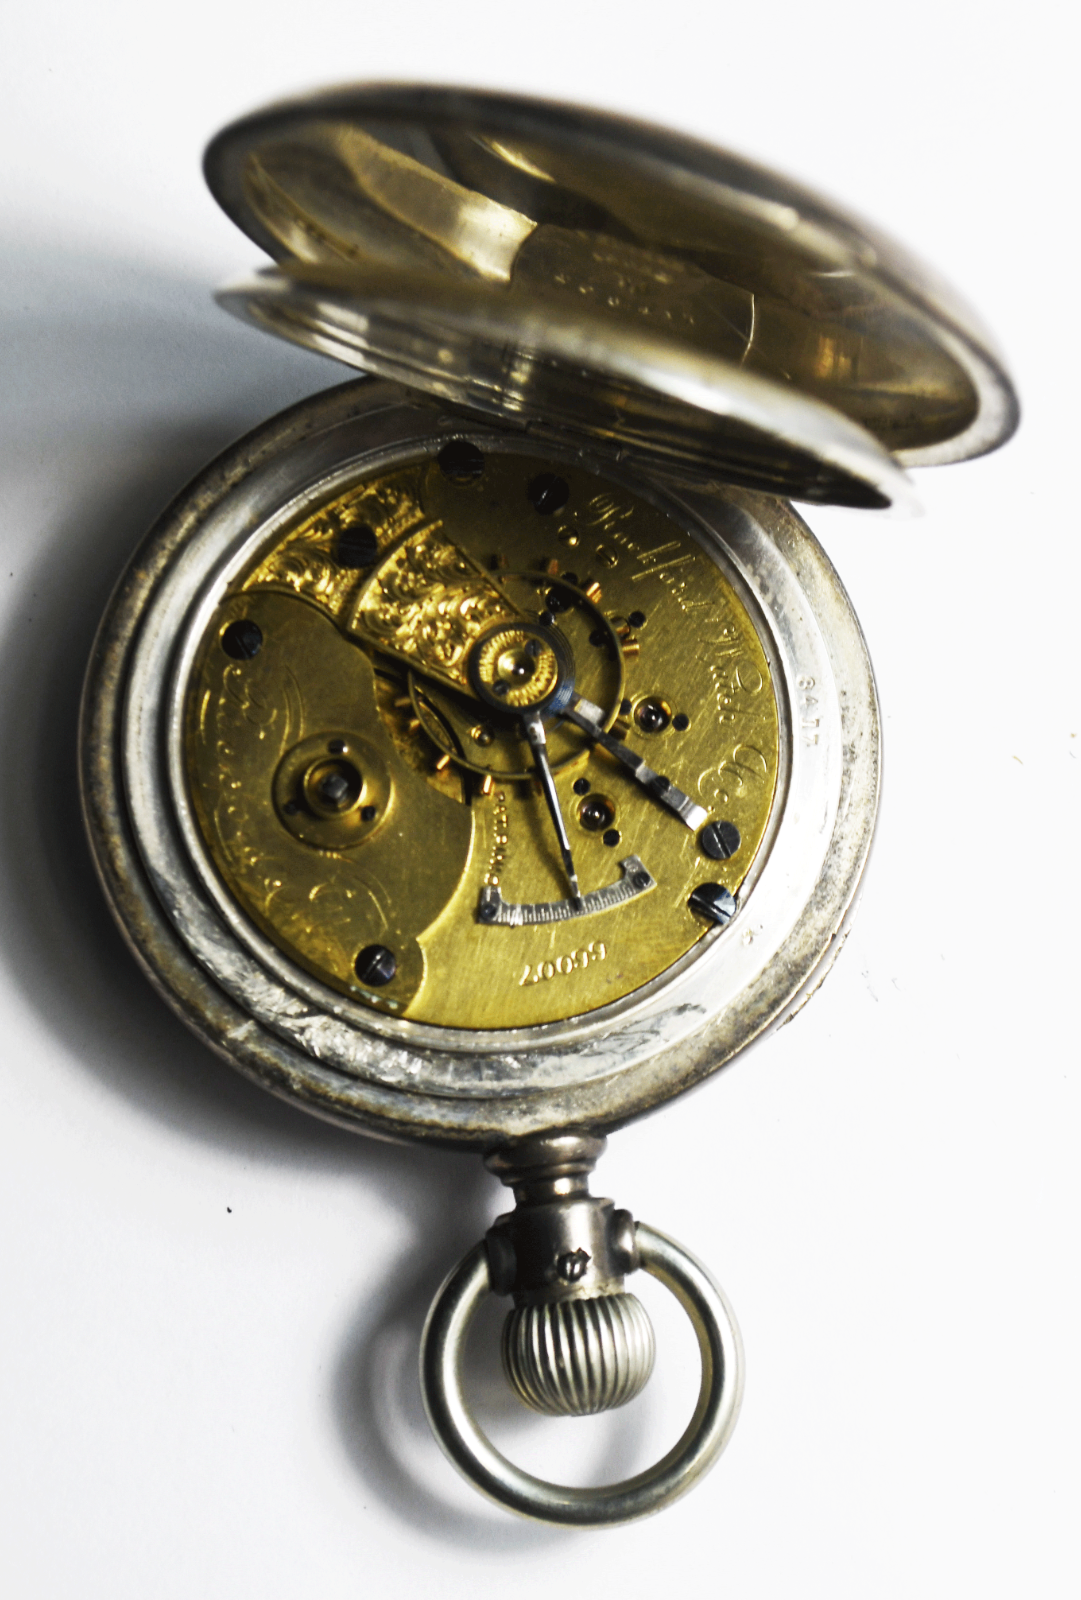 1878 Rockford Transitional KW PW LS Pocket Watch OF Coin #4 Silver Case Size 18